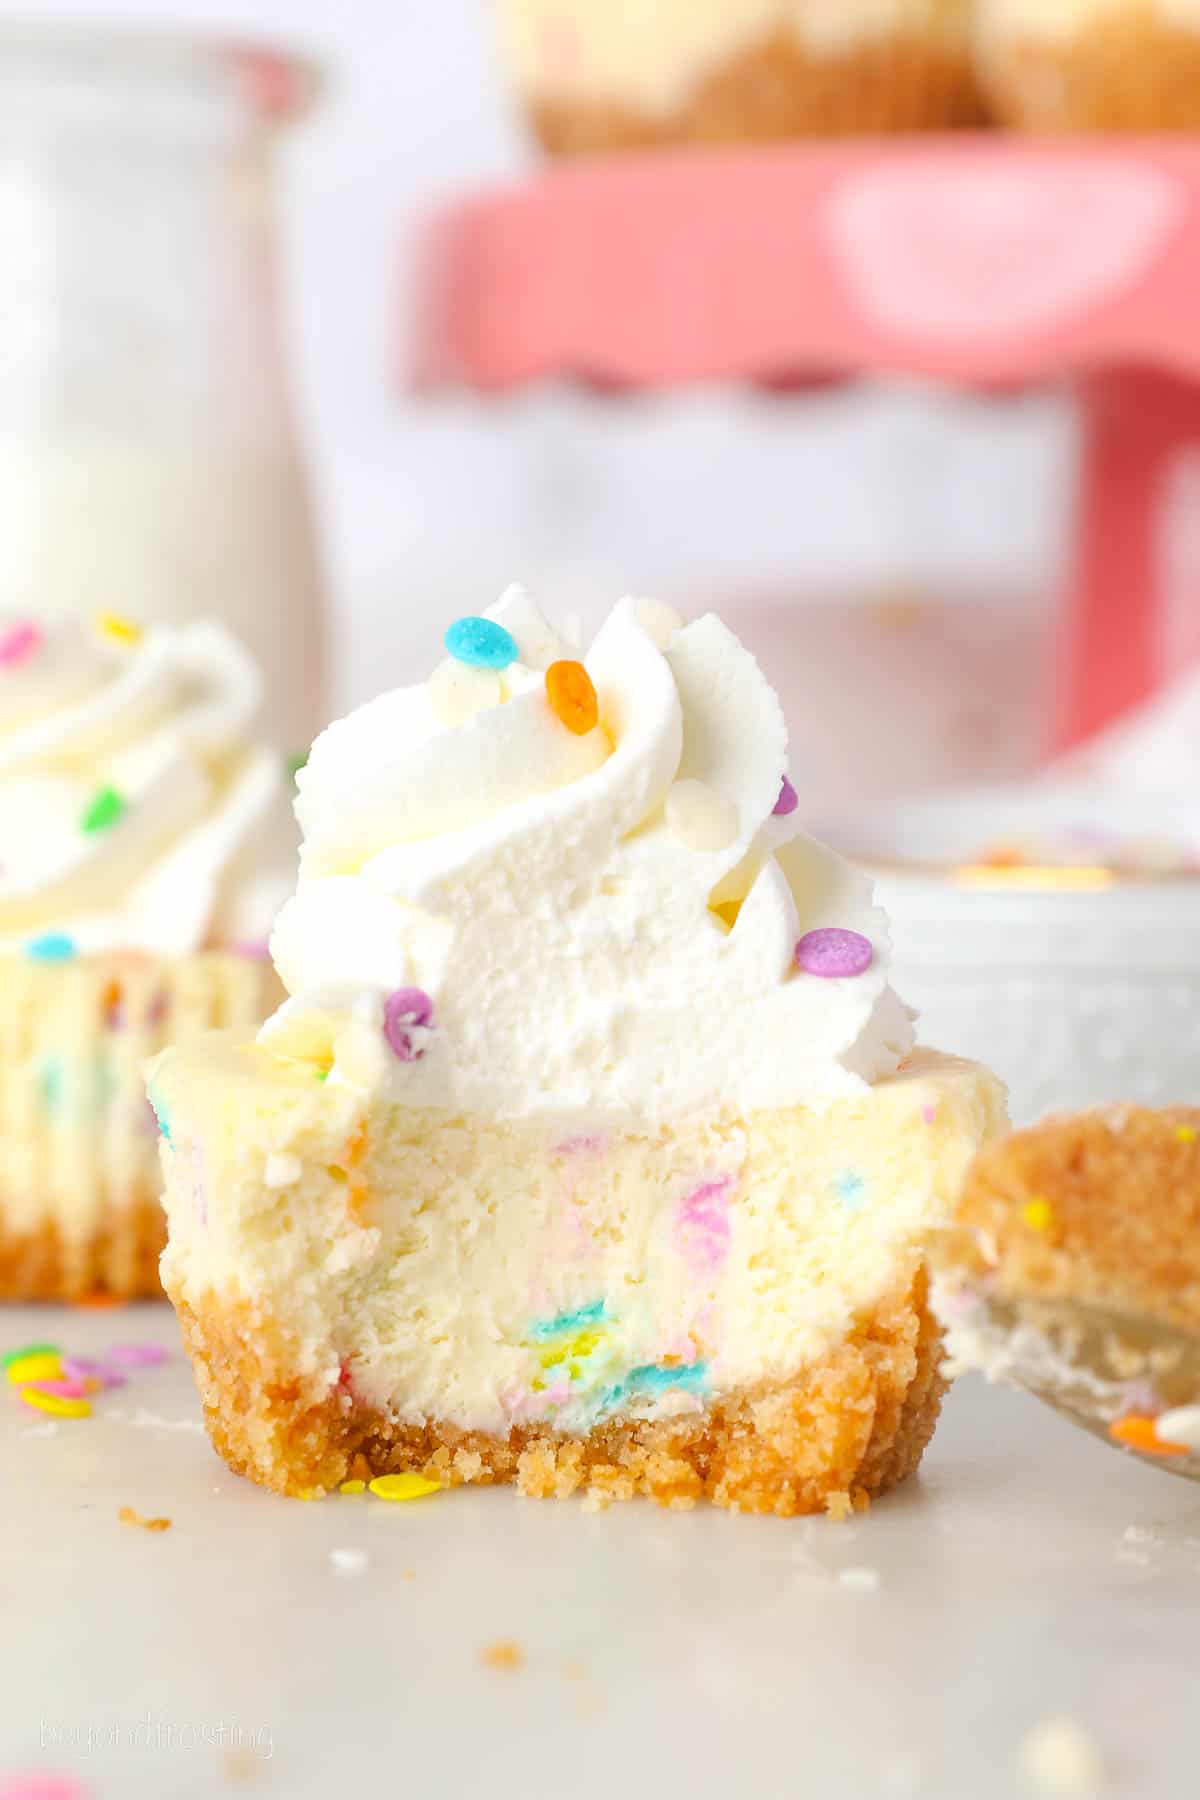 A mini funfetti cheesecake topped with a swirl of whipped cream and sprinkles with a bite missing.